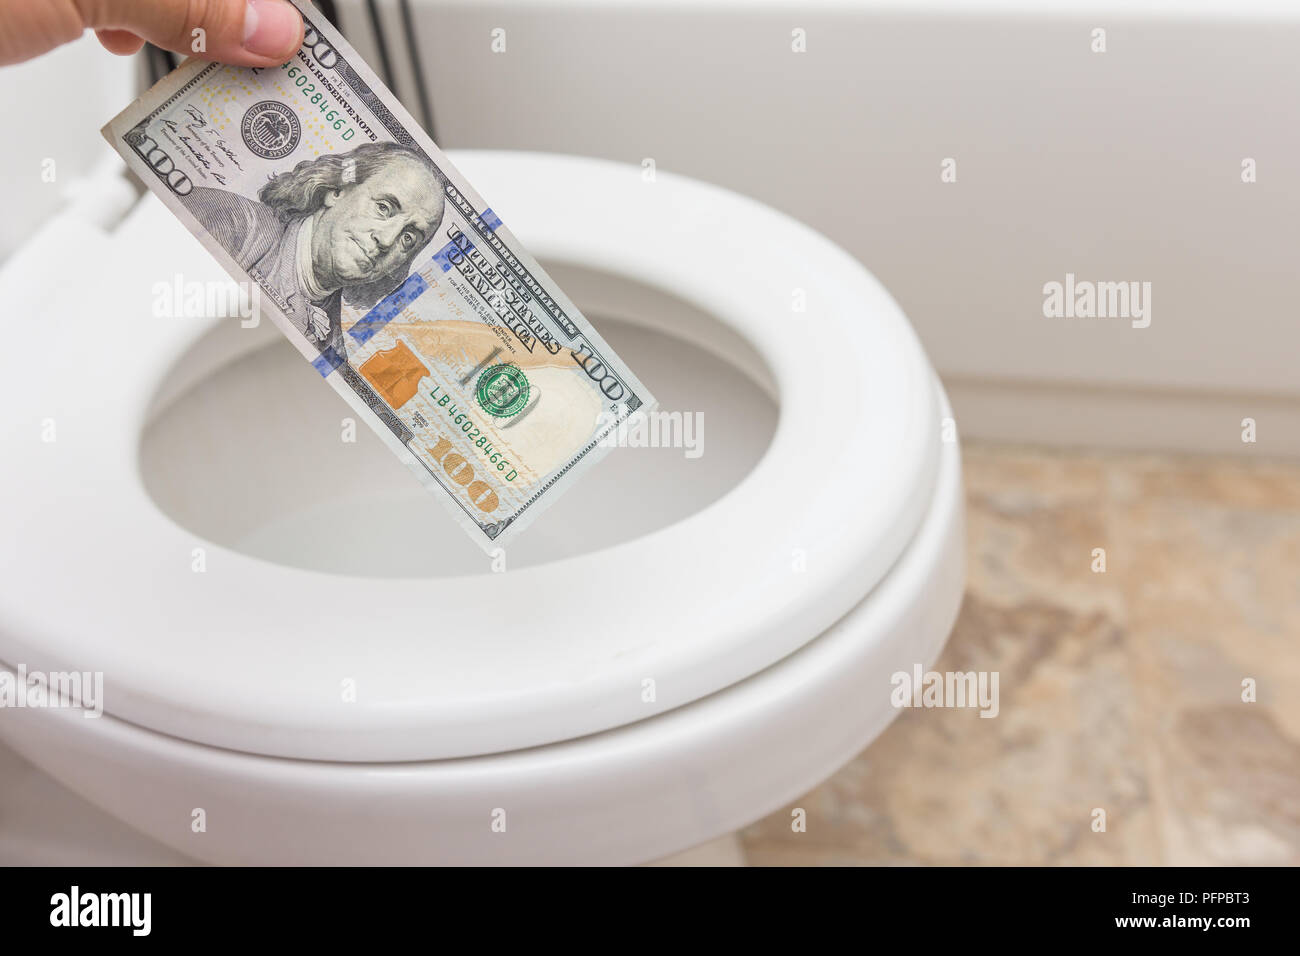 Holding crisp one hundred dollar bill into toilet; clean and bright; finance concept Stock Photo